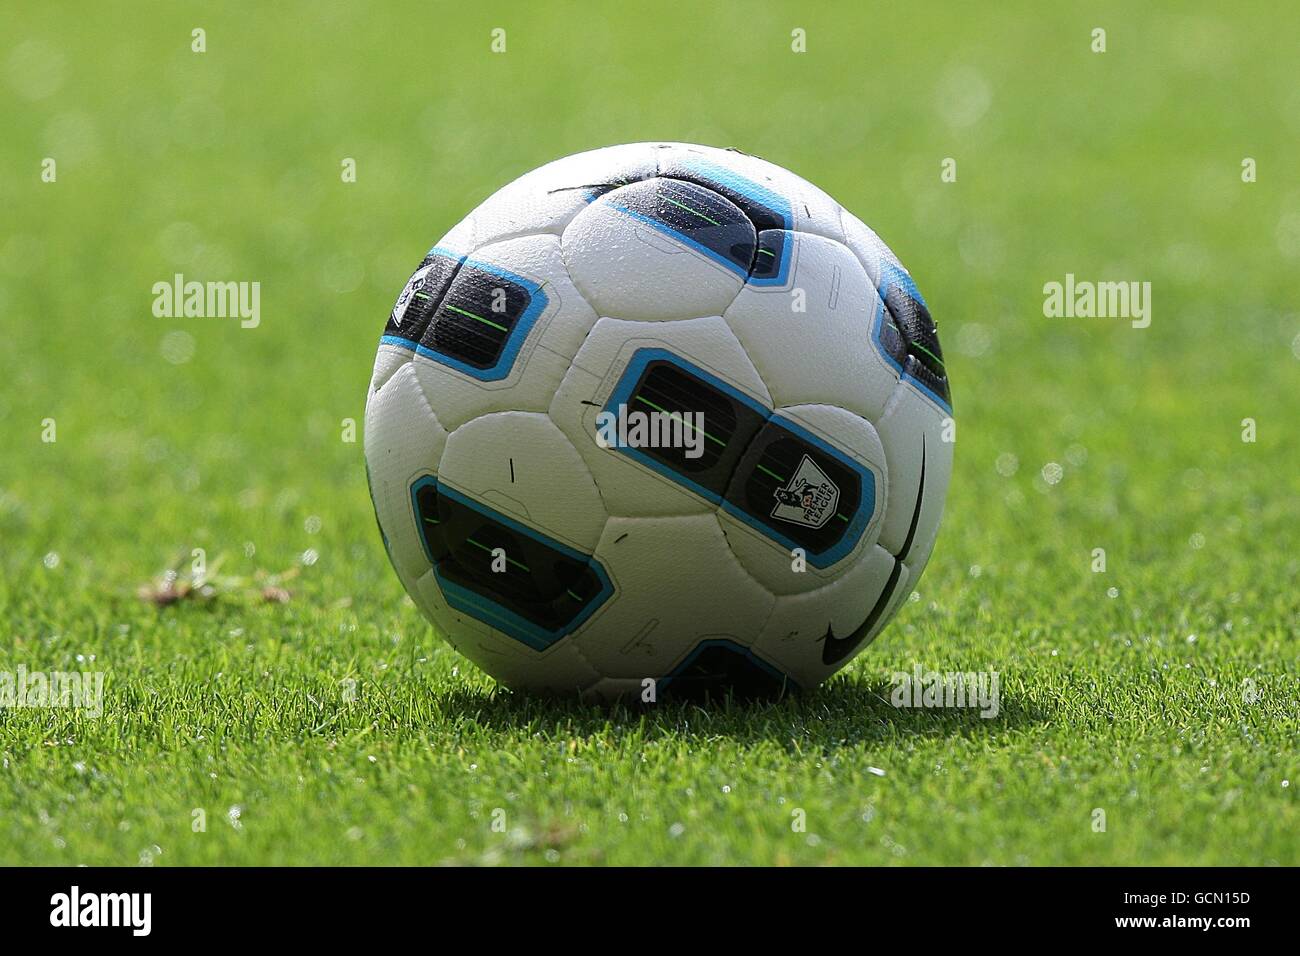 The Nike T90 Tracer ball, the official matchball for the Barclays Premier League Stock Photo